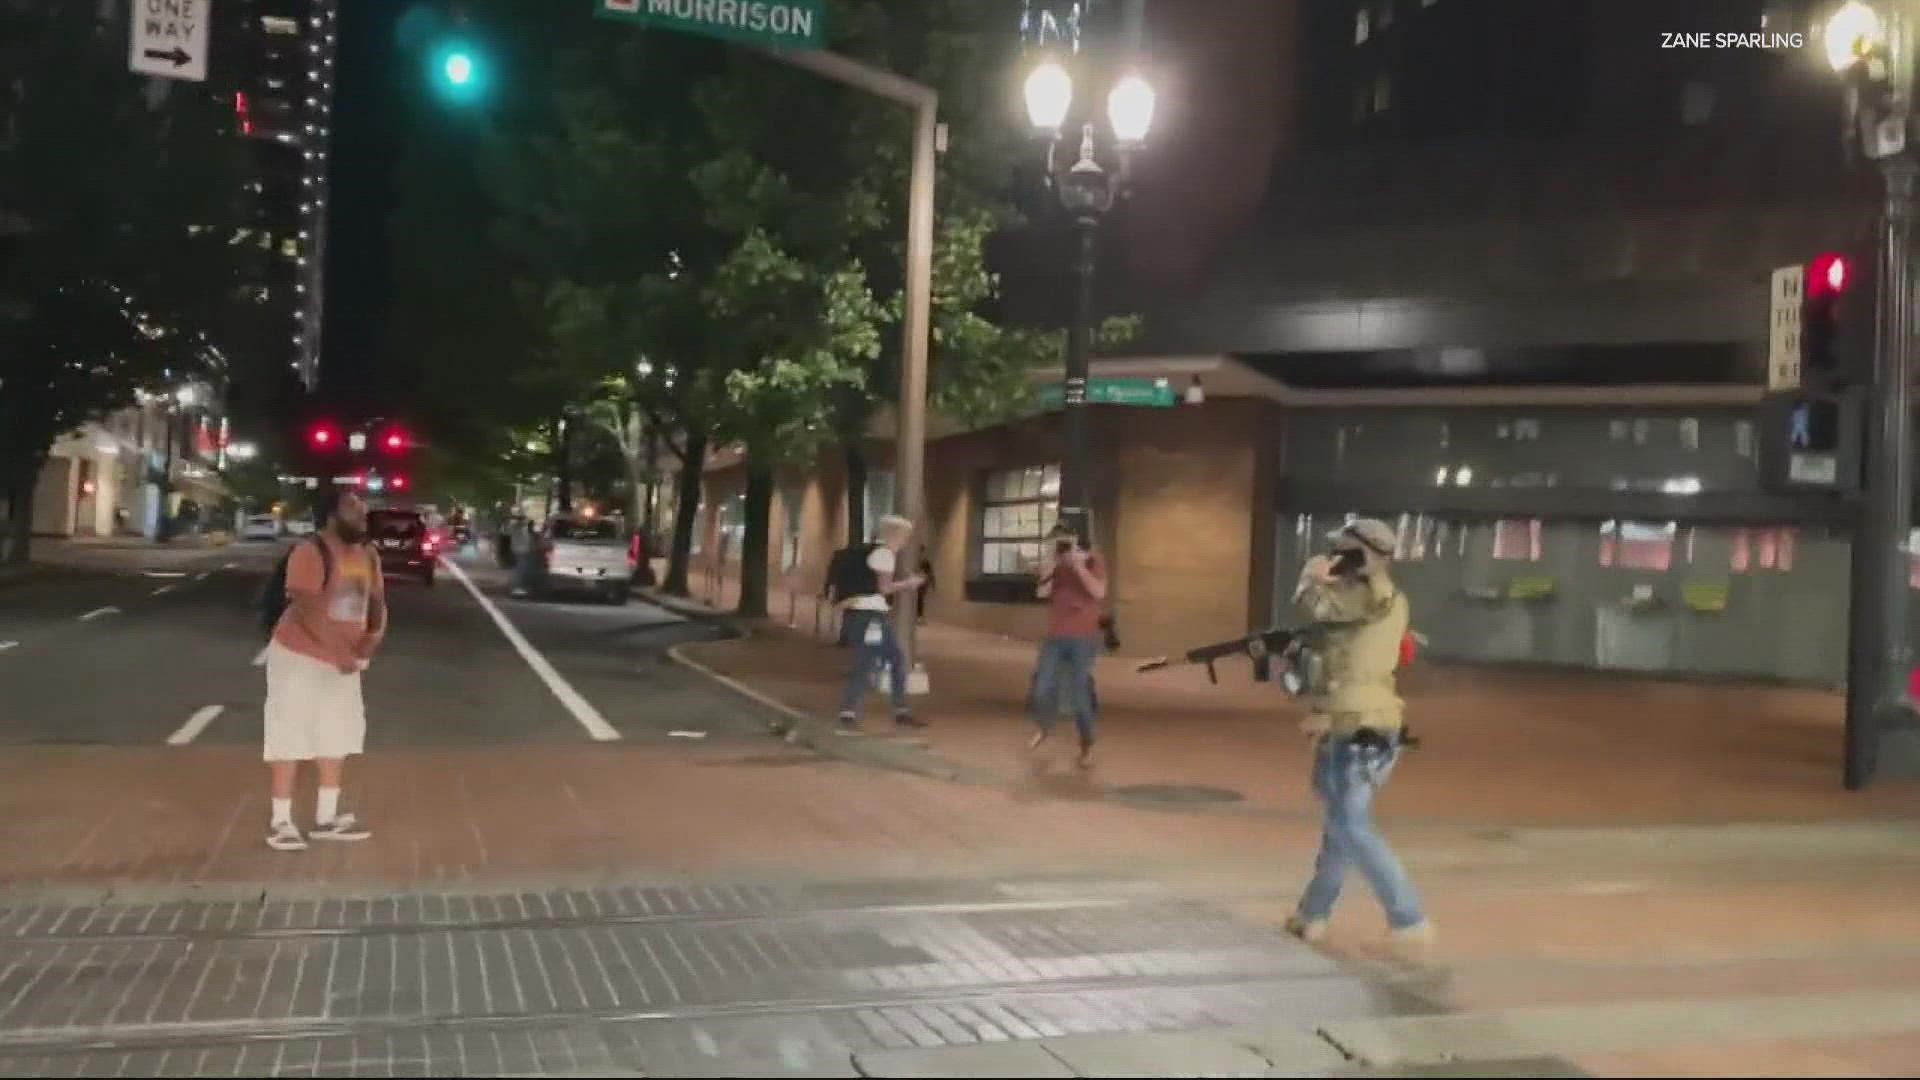 Portland police cited two other calls they were preoccupied with. It said it was aware of Antifa and far-right groups clashing.